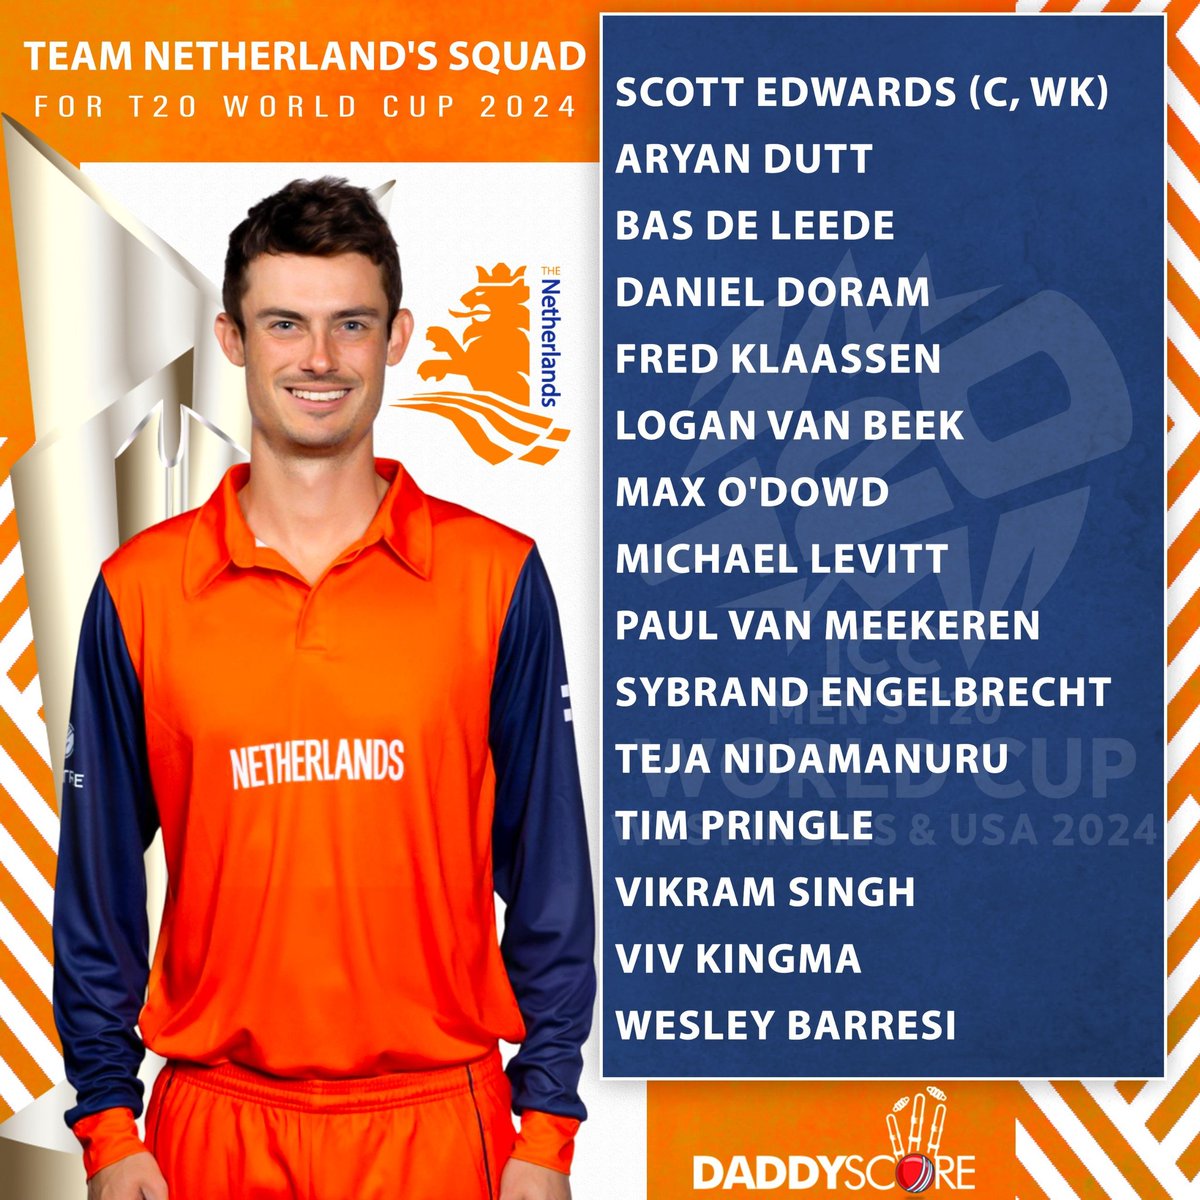 Netherlands announces squad for T20 World Cup, but big names left out 😱 Experienced all-rounder Roelof van der Merwe and key batsman Colin Ackerman were missing, with the selectors replacing them with left-arm spinner Tim Pringle and hard-hitting opening batsman Michael Levitt!